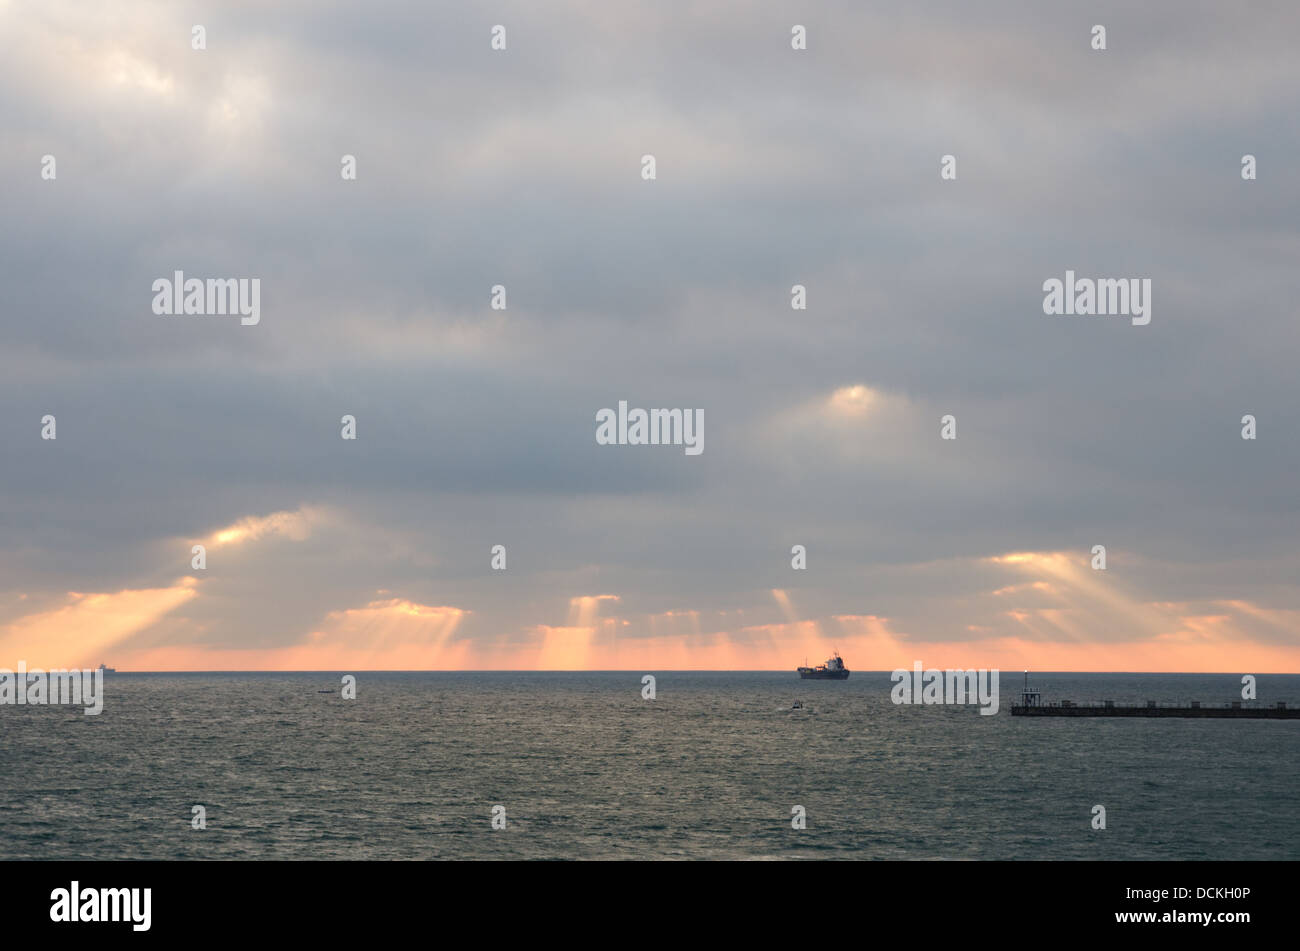 A view of distant vessels under grey clouds with pink early-morning sun rays trying to break through. Stock Photo